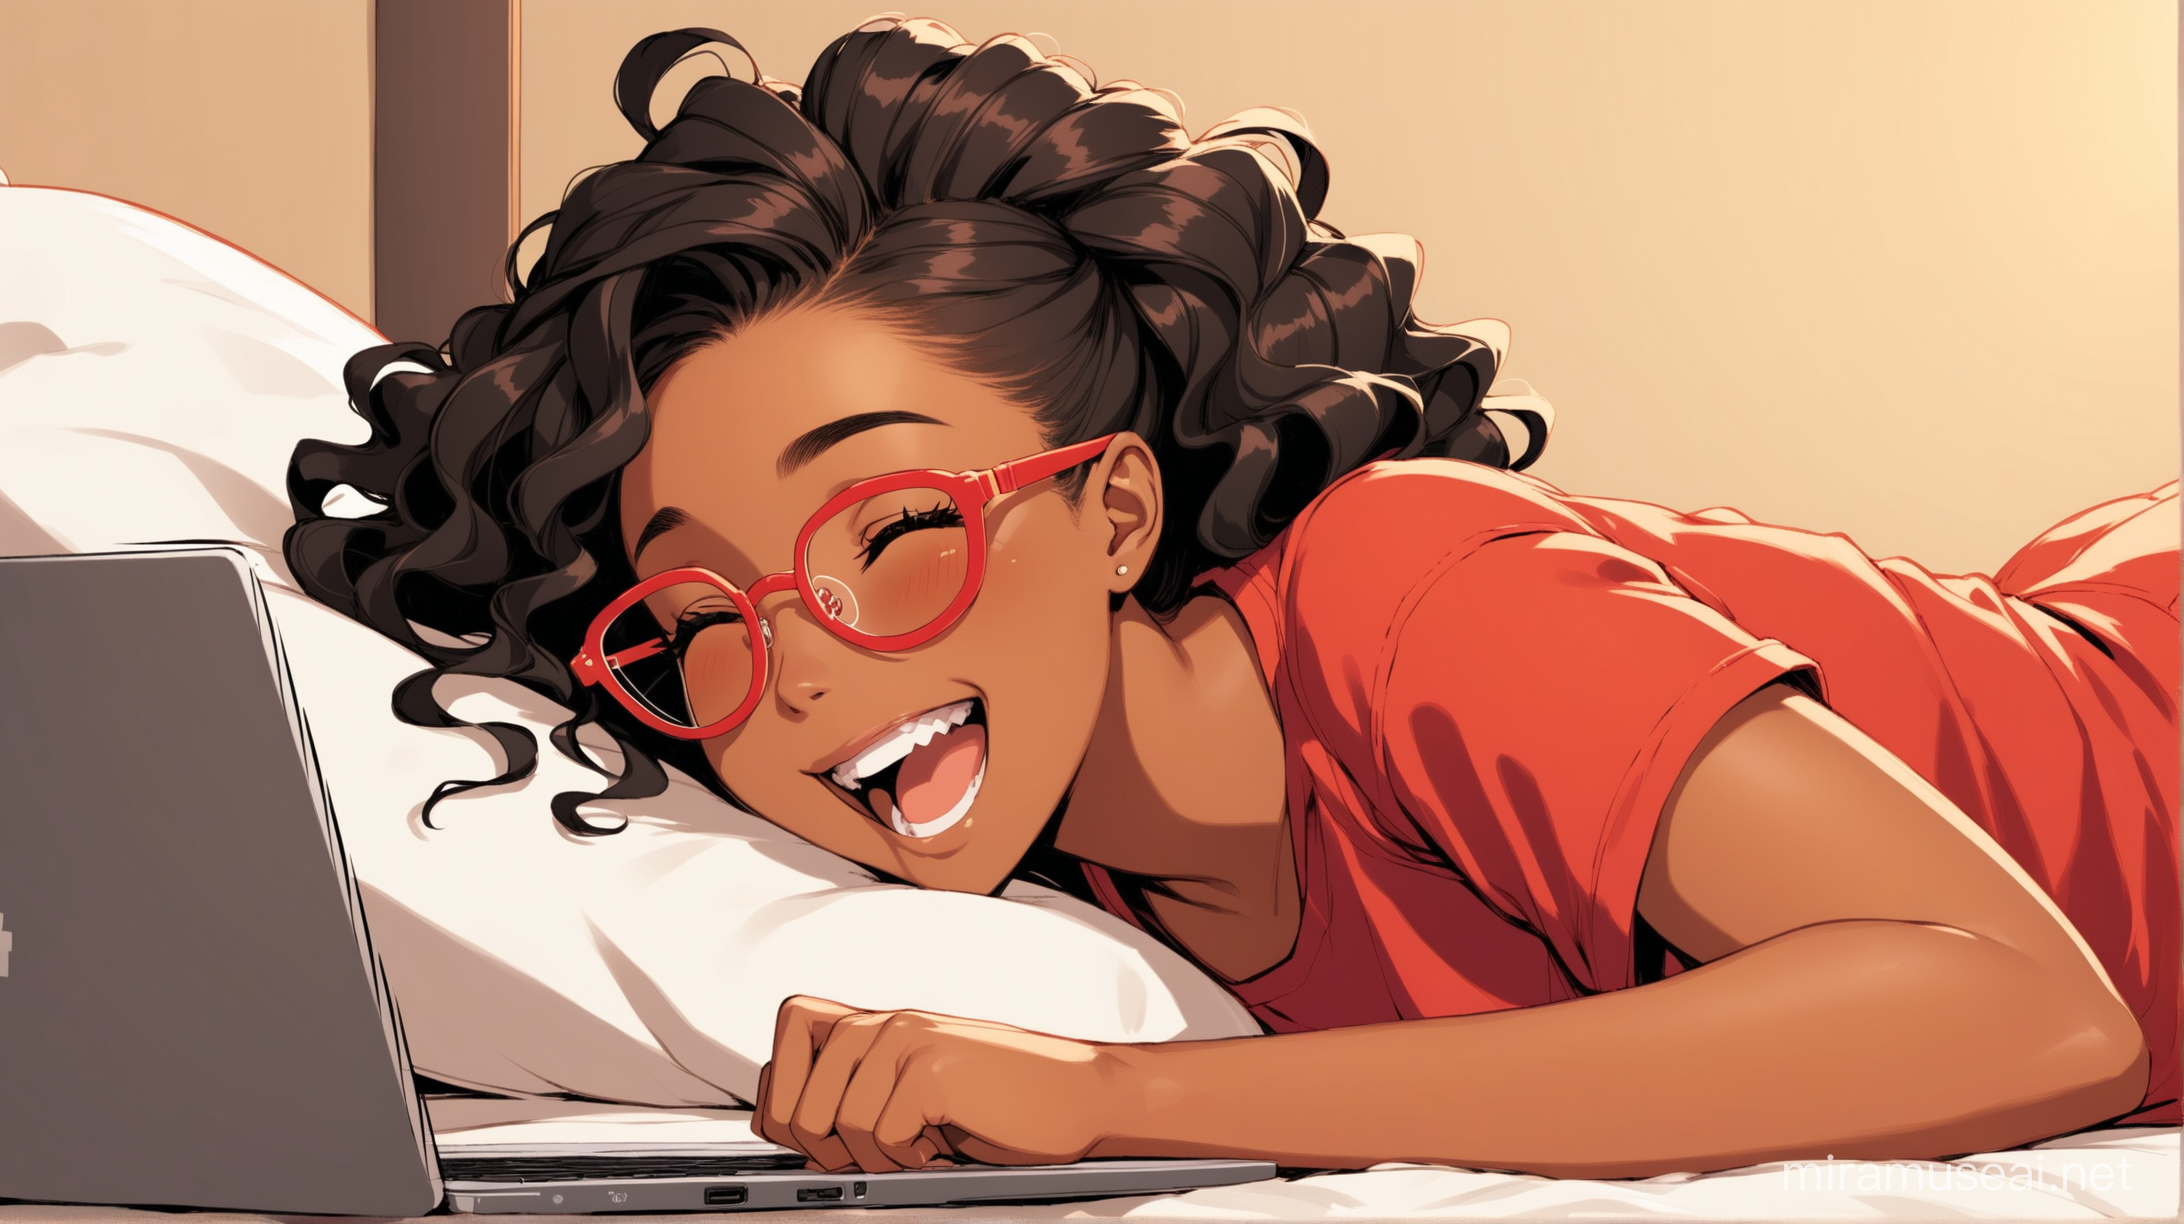 21 year old black woman, with a dark brown colored passion twist hairstyle, she is wearing a pair of red square-shaped eyeglasses on her face, she is watching an anime on her laptop computer, she is laughing out loud while lying back turned on the bed